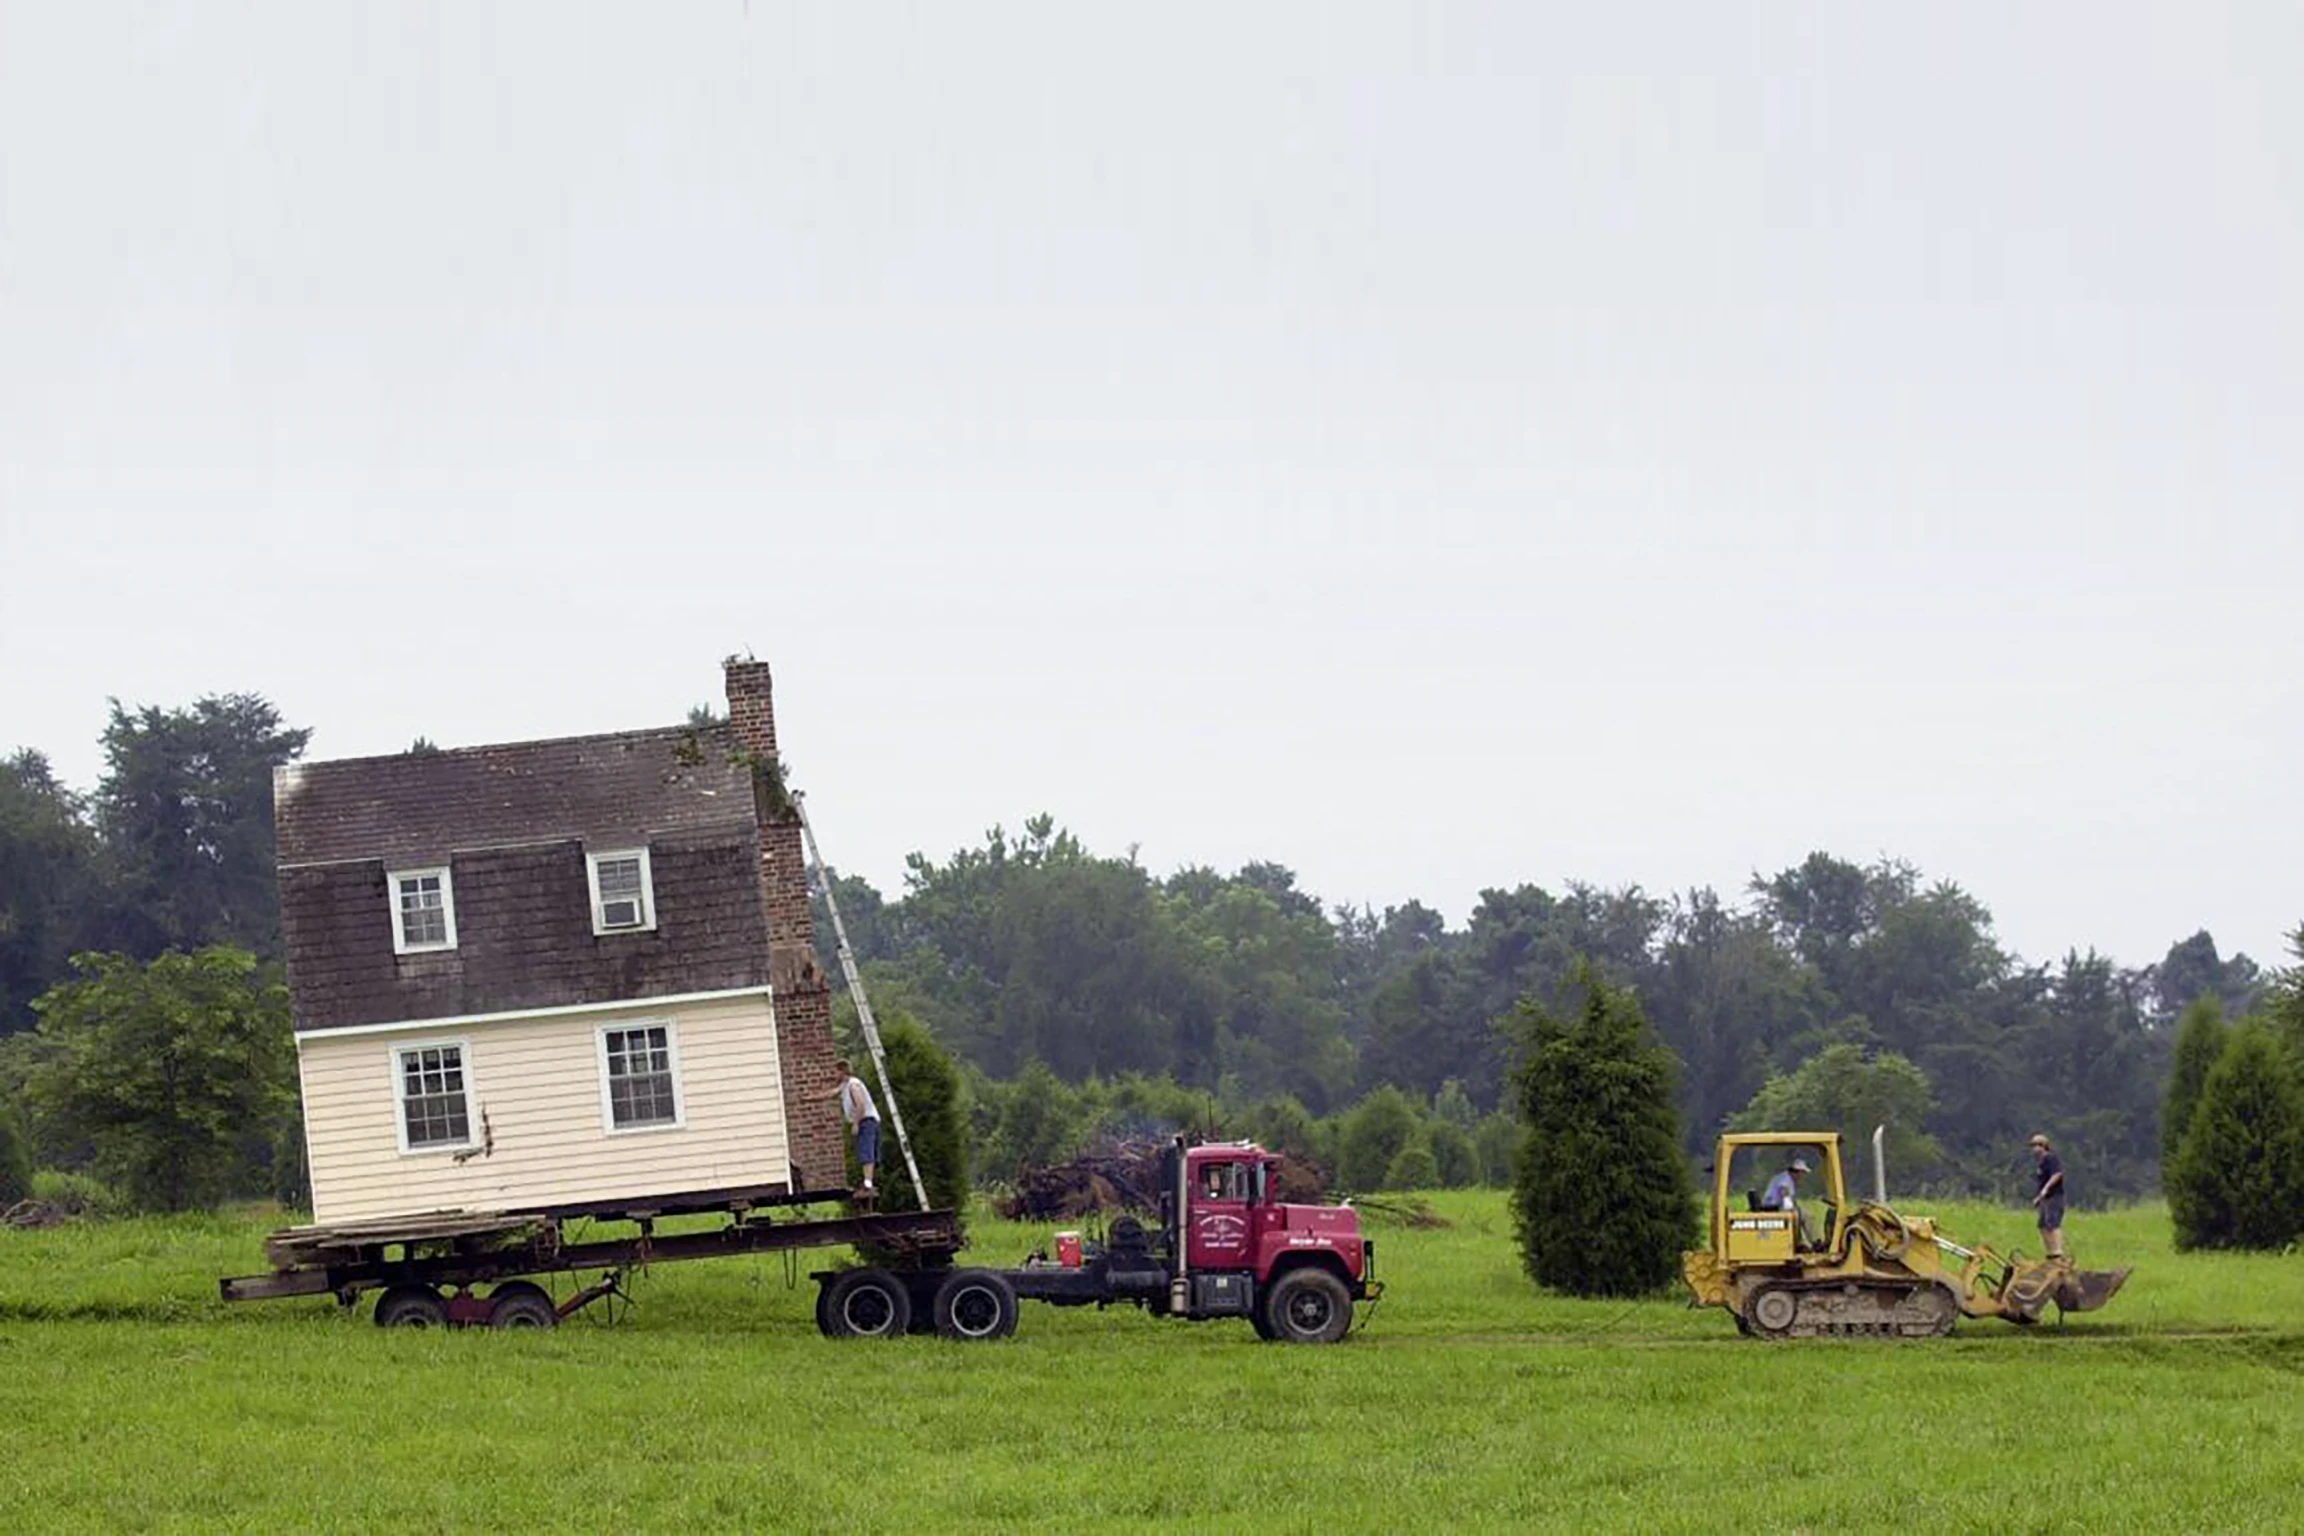 In an open field, a truck tows a fully constructed house on a flatbed.